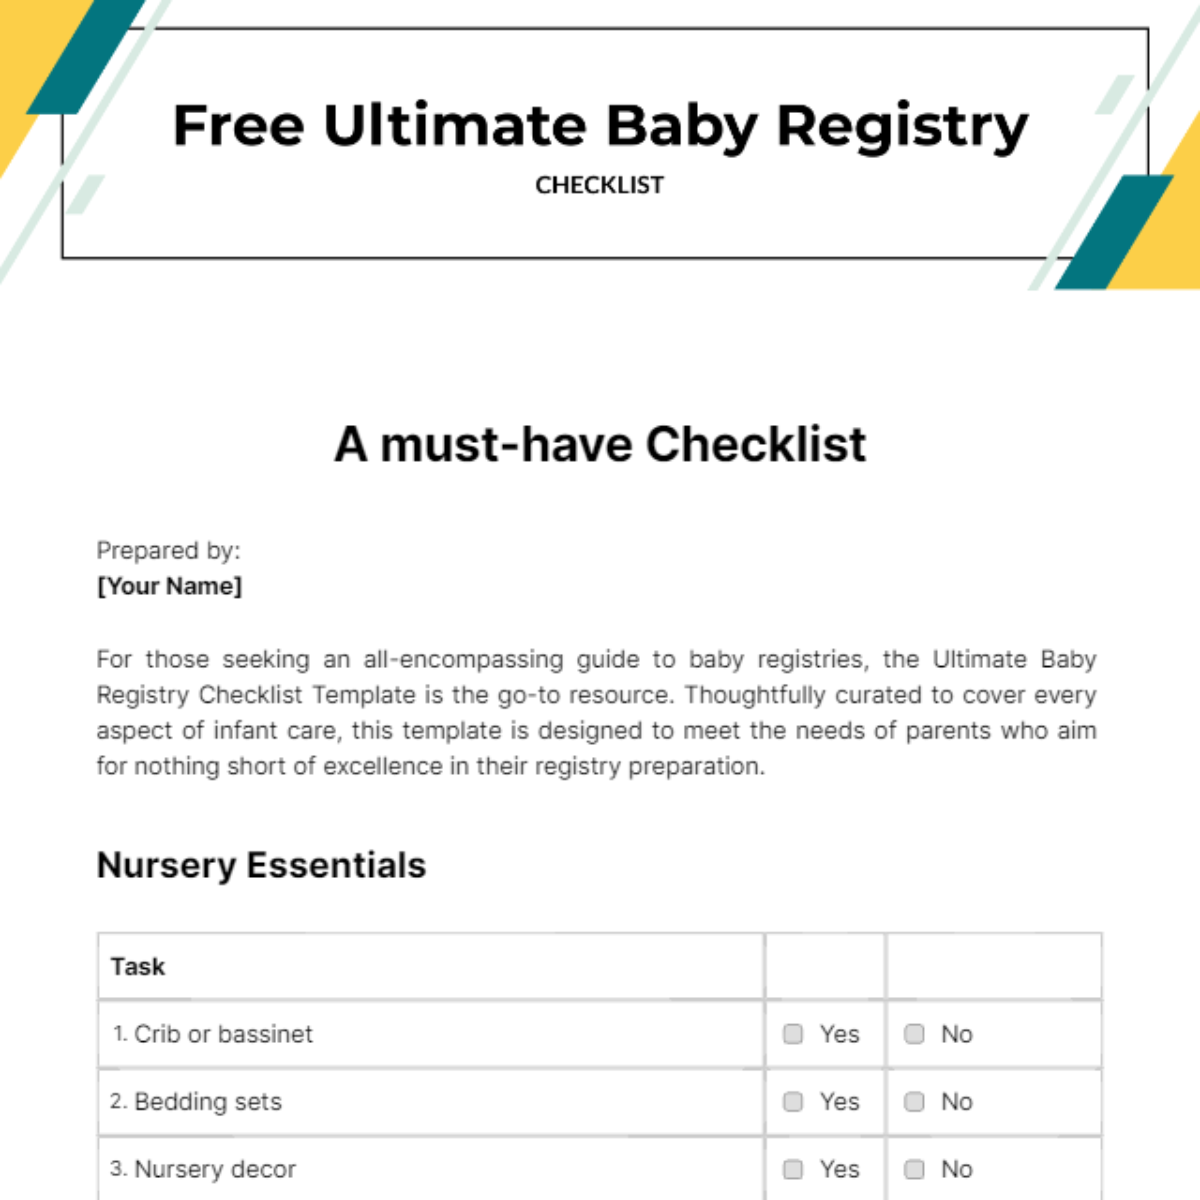 Free Ultimate Baby Registry Checklist Template